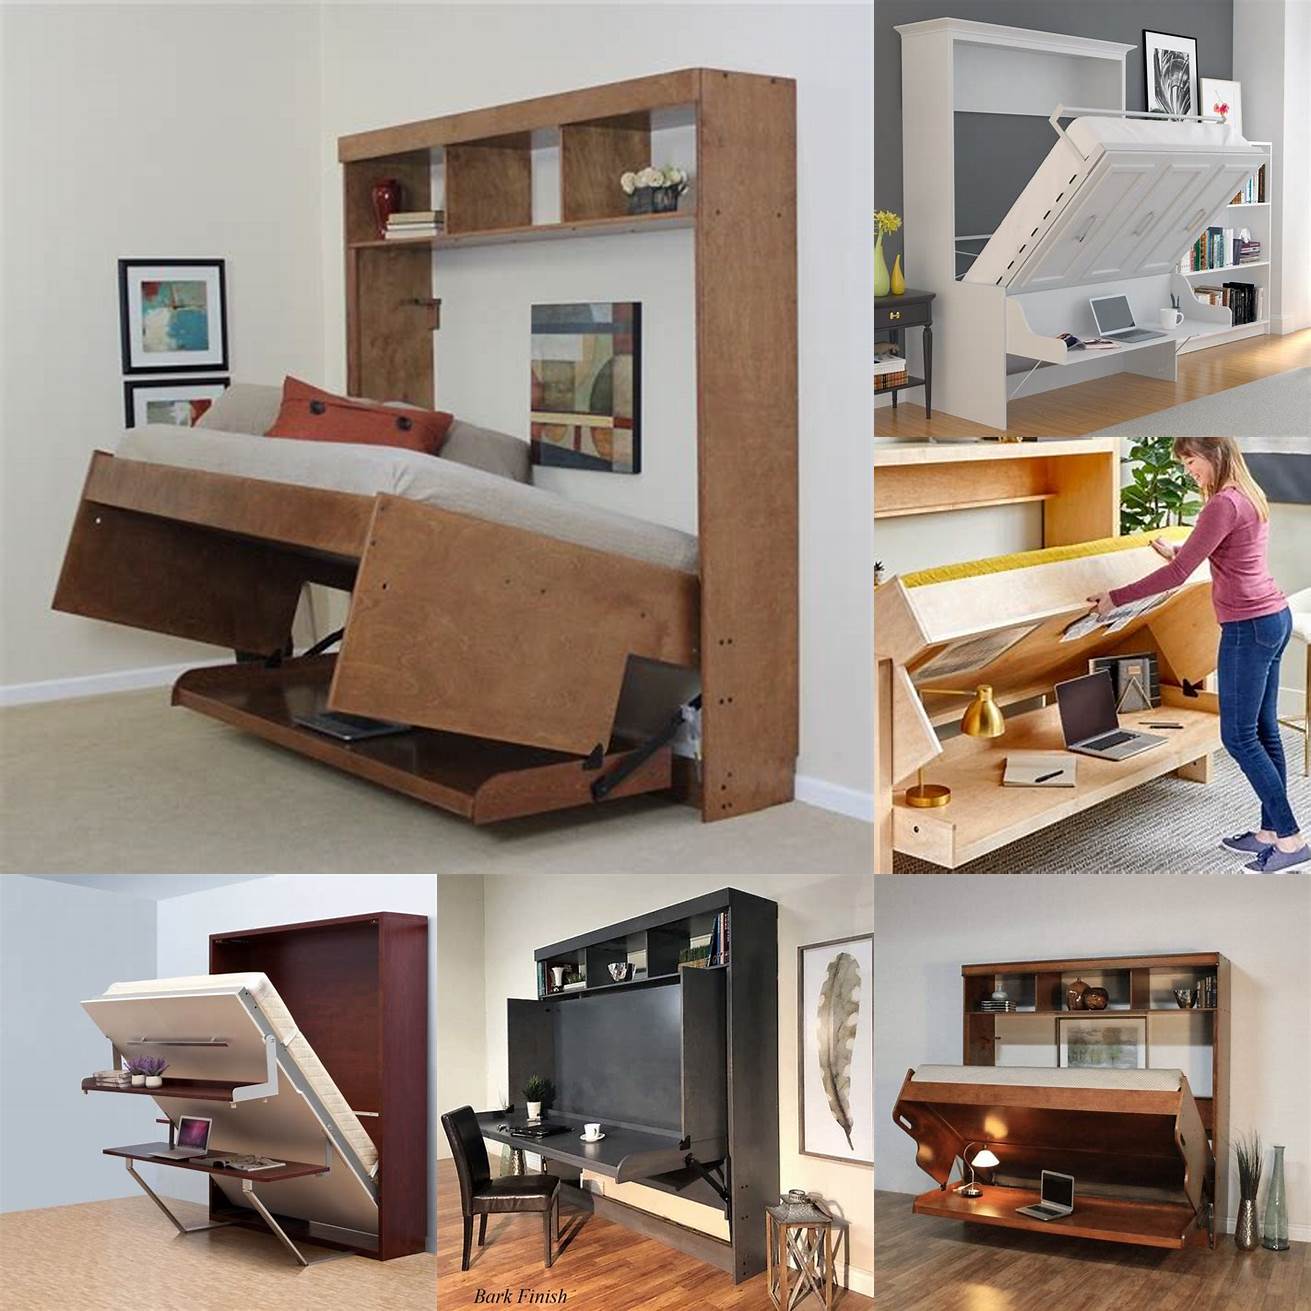 A hidden bed with a desk